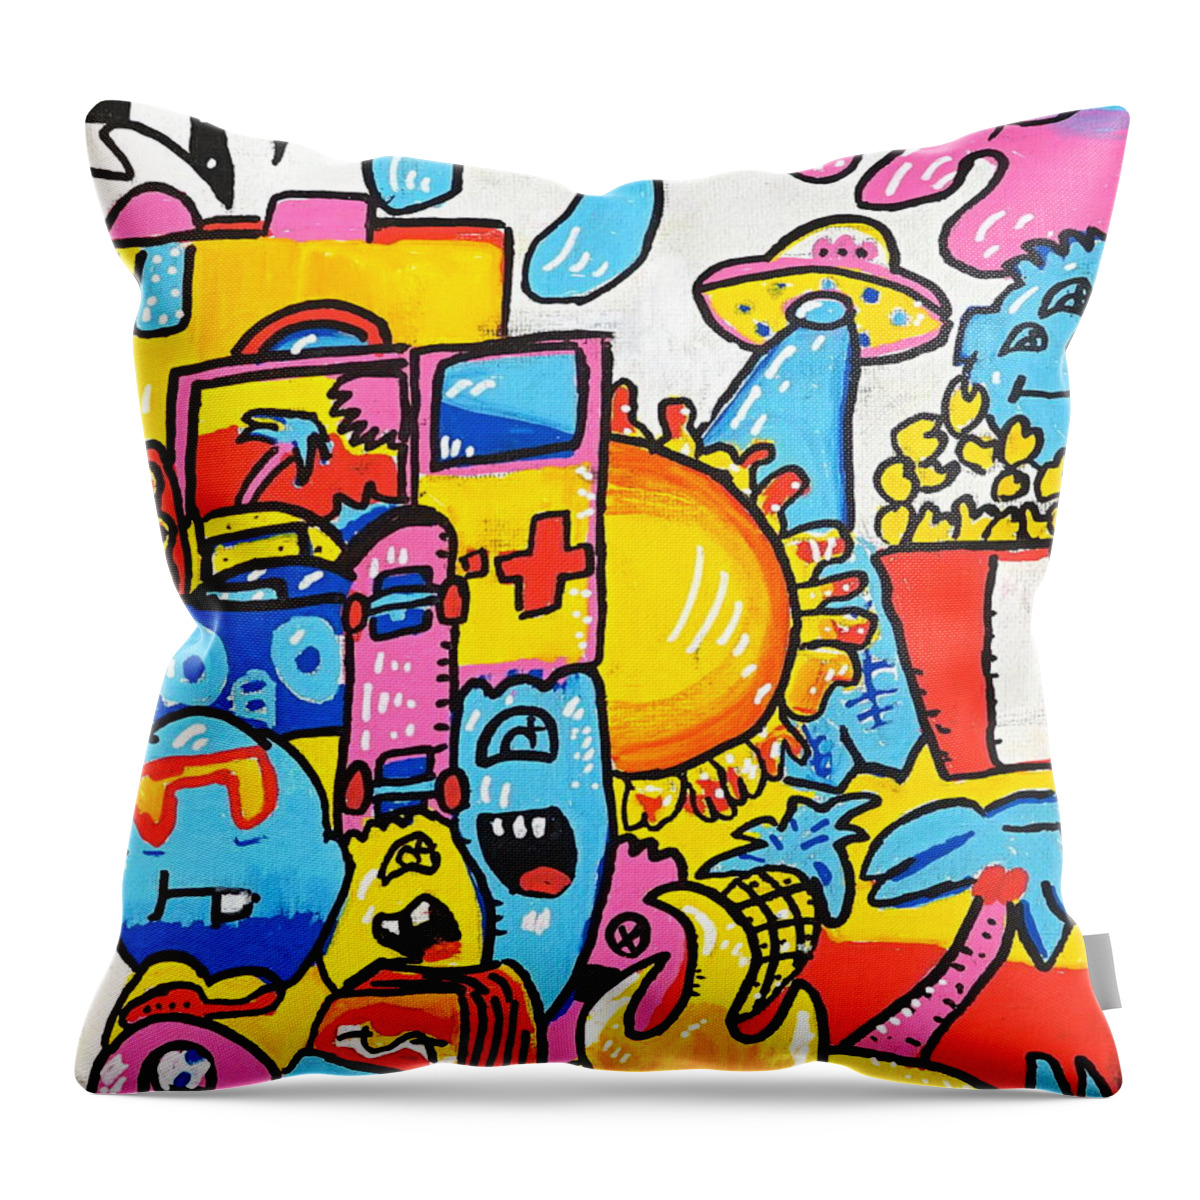 Character Throw Pillow featuring the drawing Spaceship by Guest Artist - Marco Bilgutay